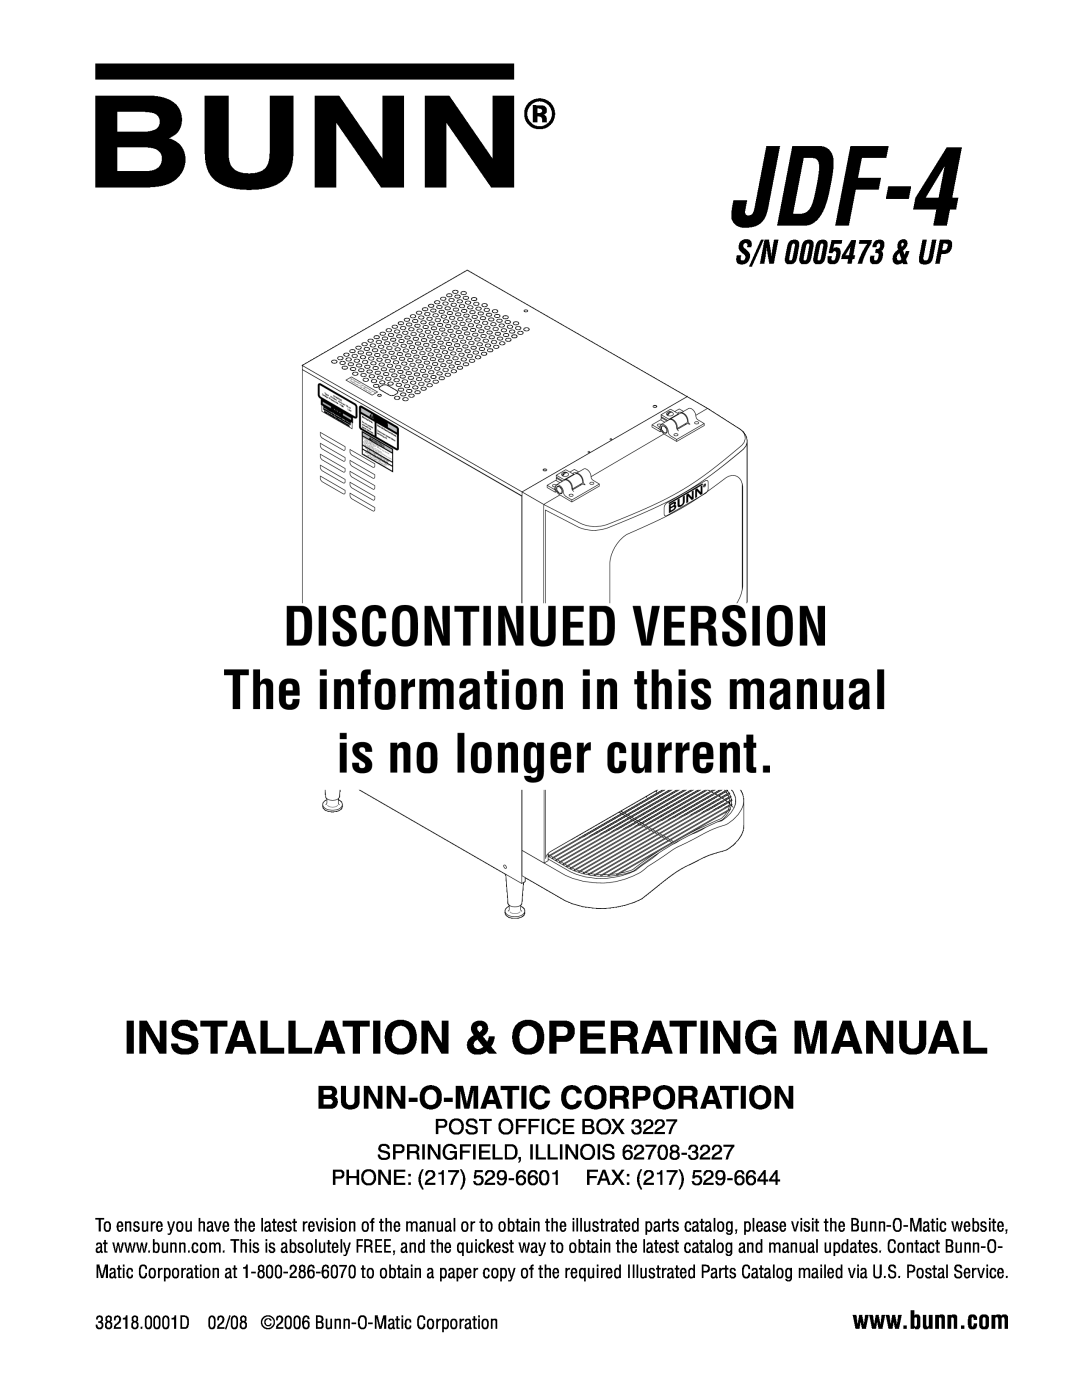 Bunn S/N 0005473 & UP manual Bunn-O-Matic Corporation, JDF-4, DISCONTINUED VERSION The information in thismanual, CRef 